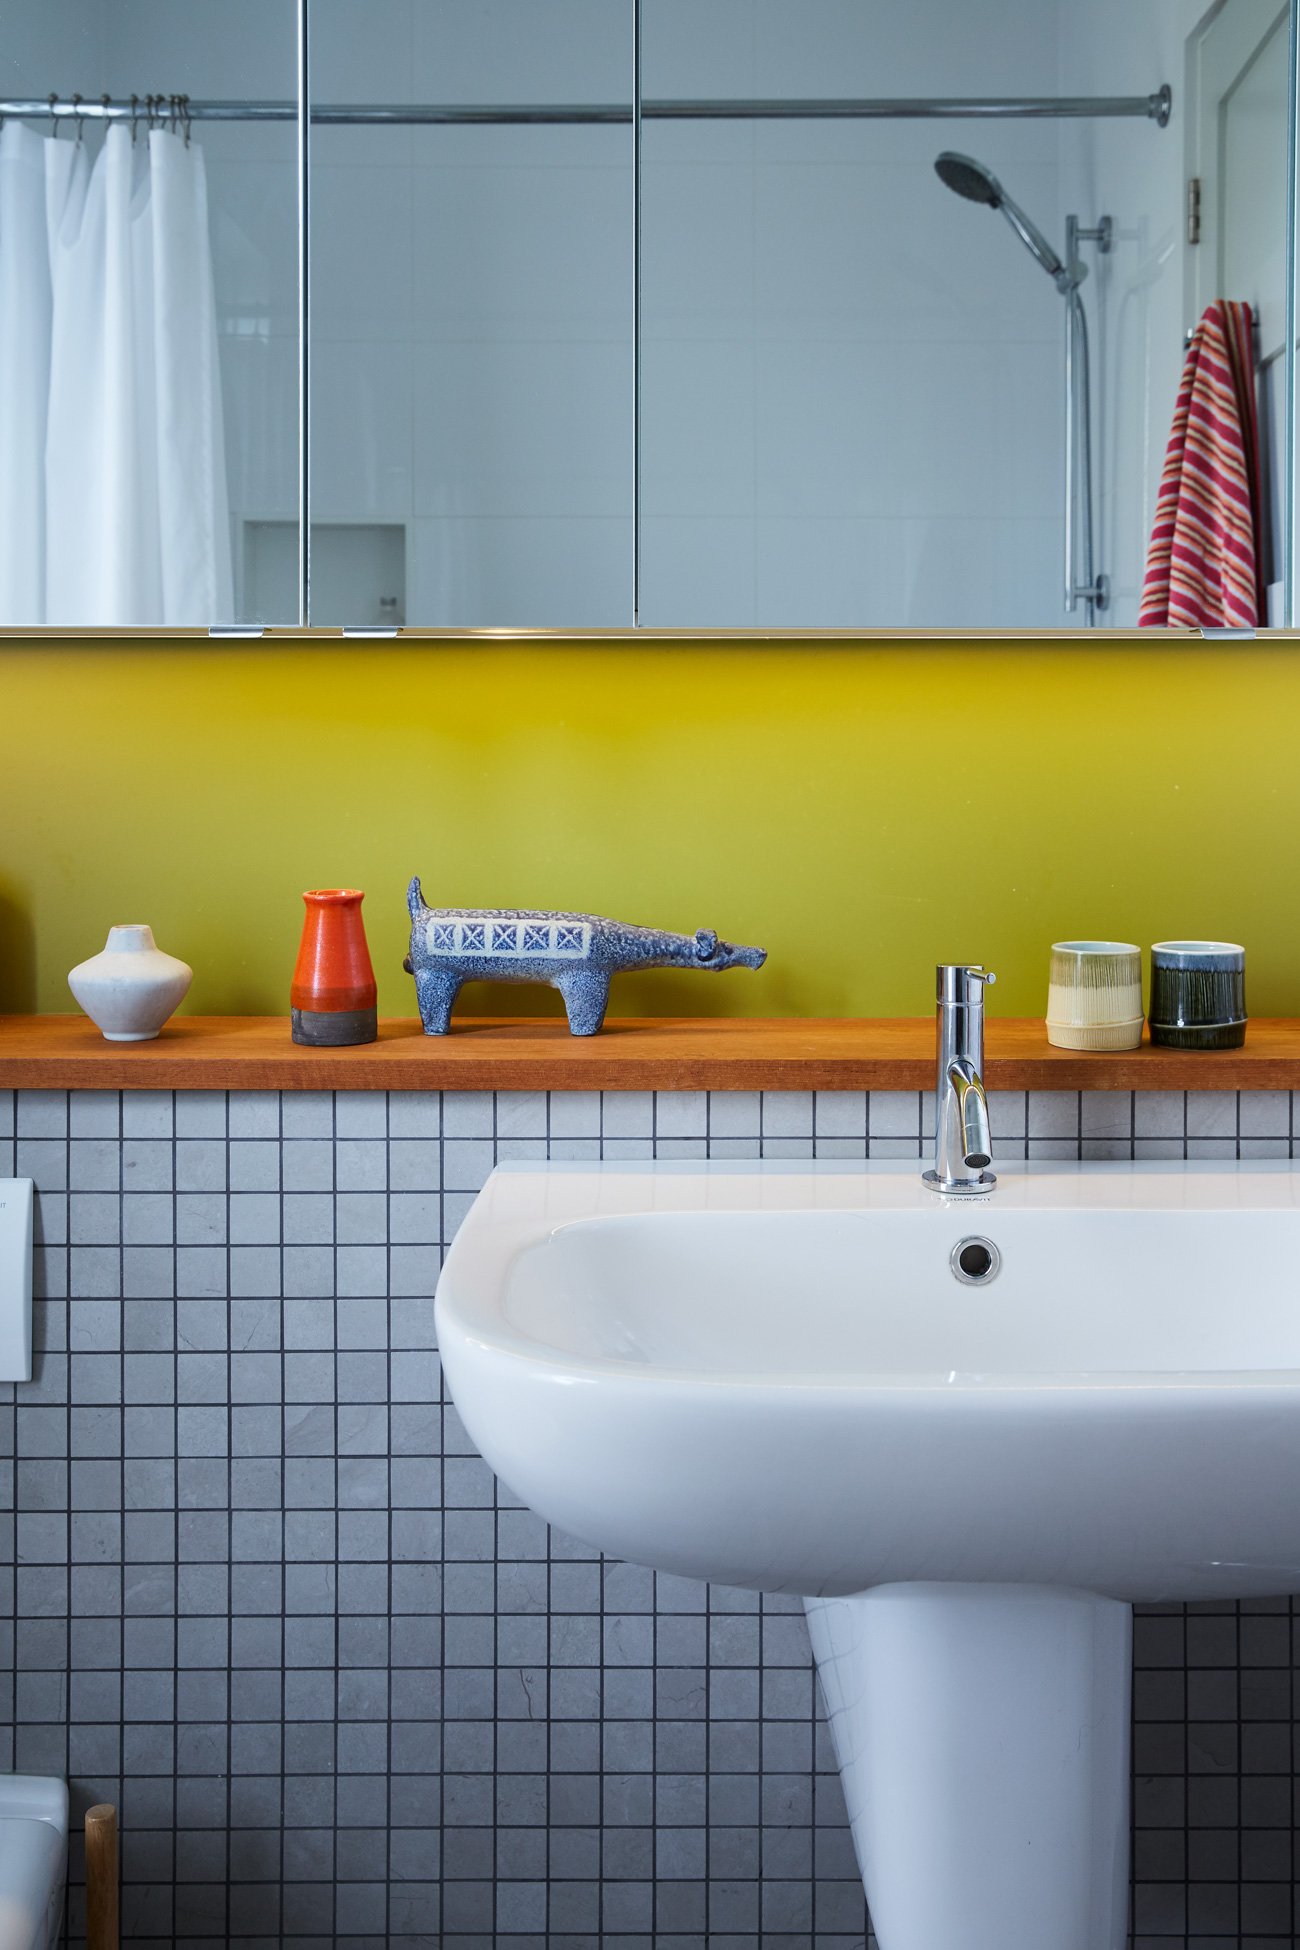 Mosaic tile from Ciot and chartreuse paint jazz up the bathroom. Cabano faucet from Taps.